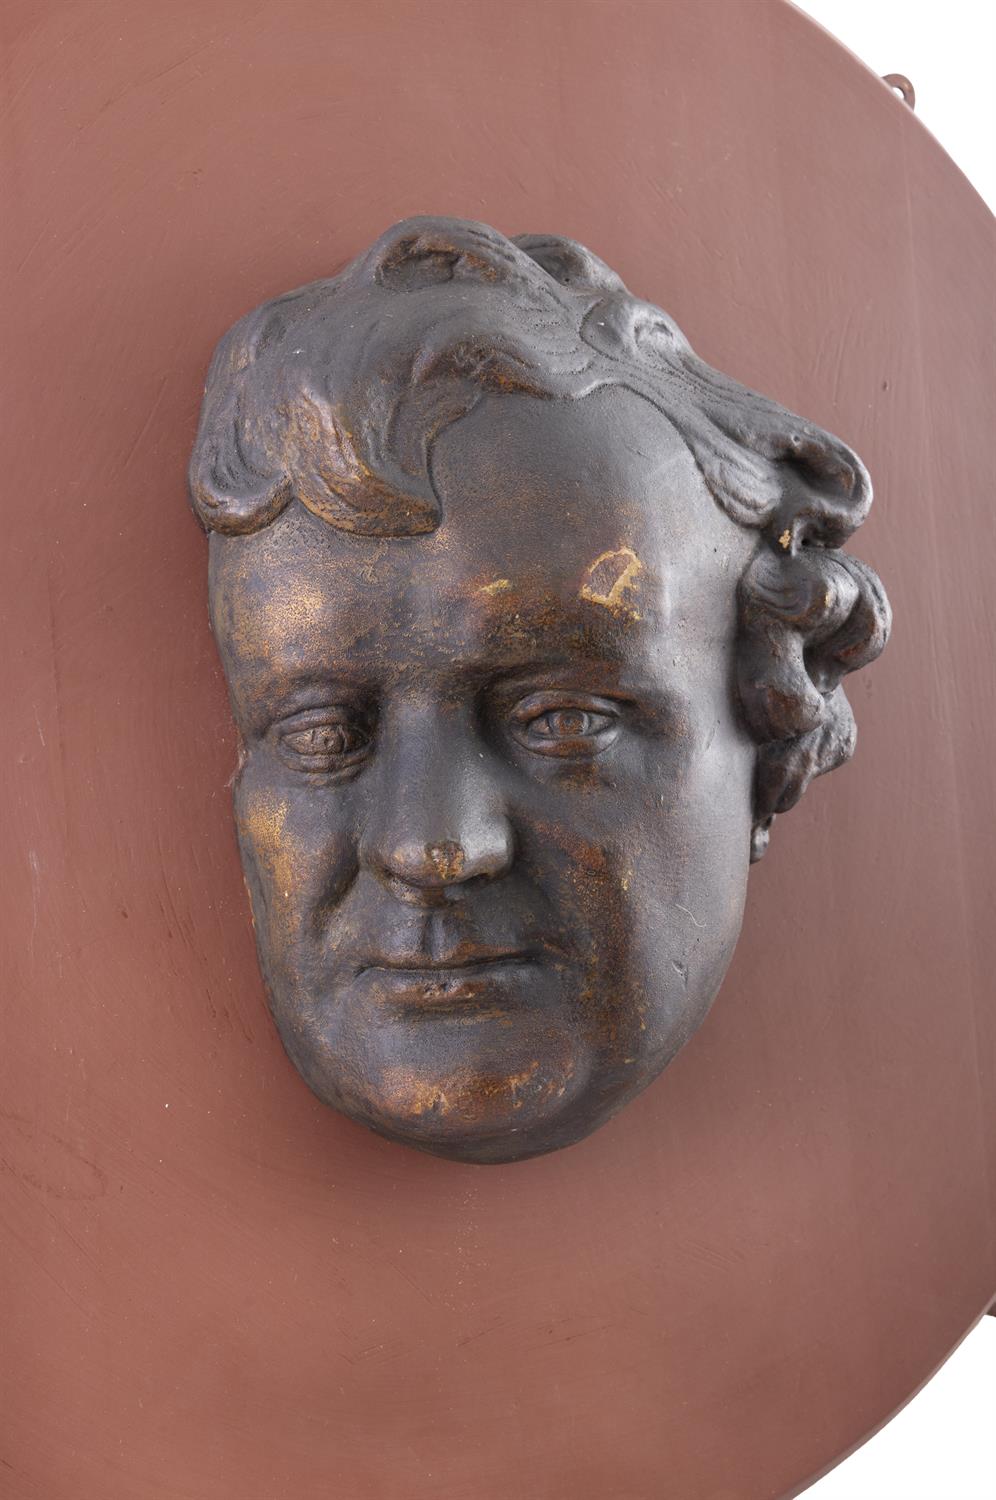 ***Please note: this is ceramic with a 'bronzed' finish rather than bronze*** A BRONZED DEATH MASK - Image 2 of 12